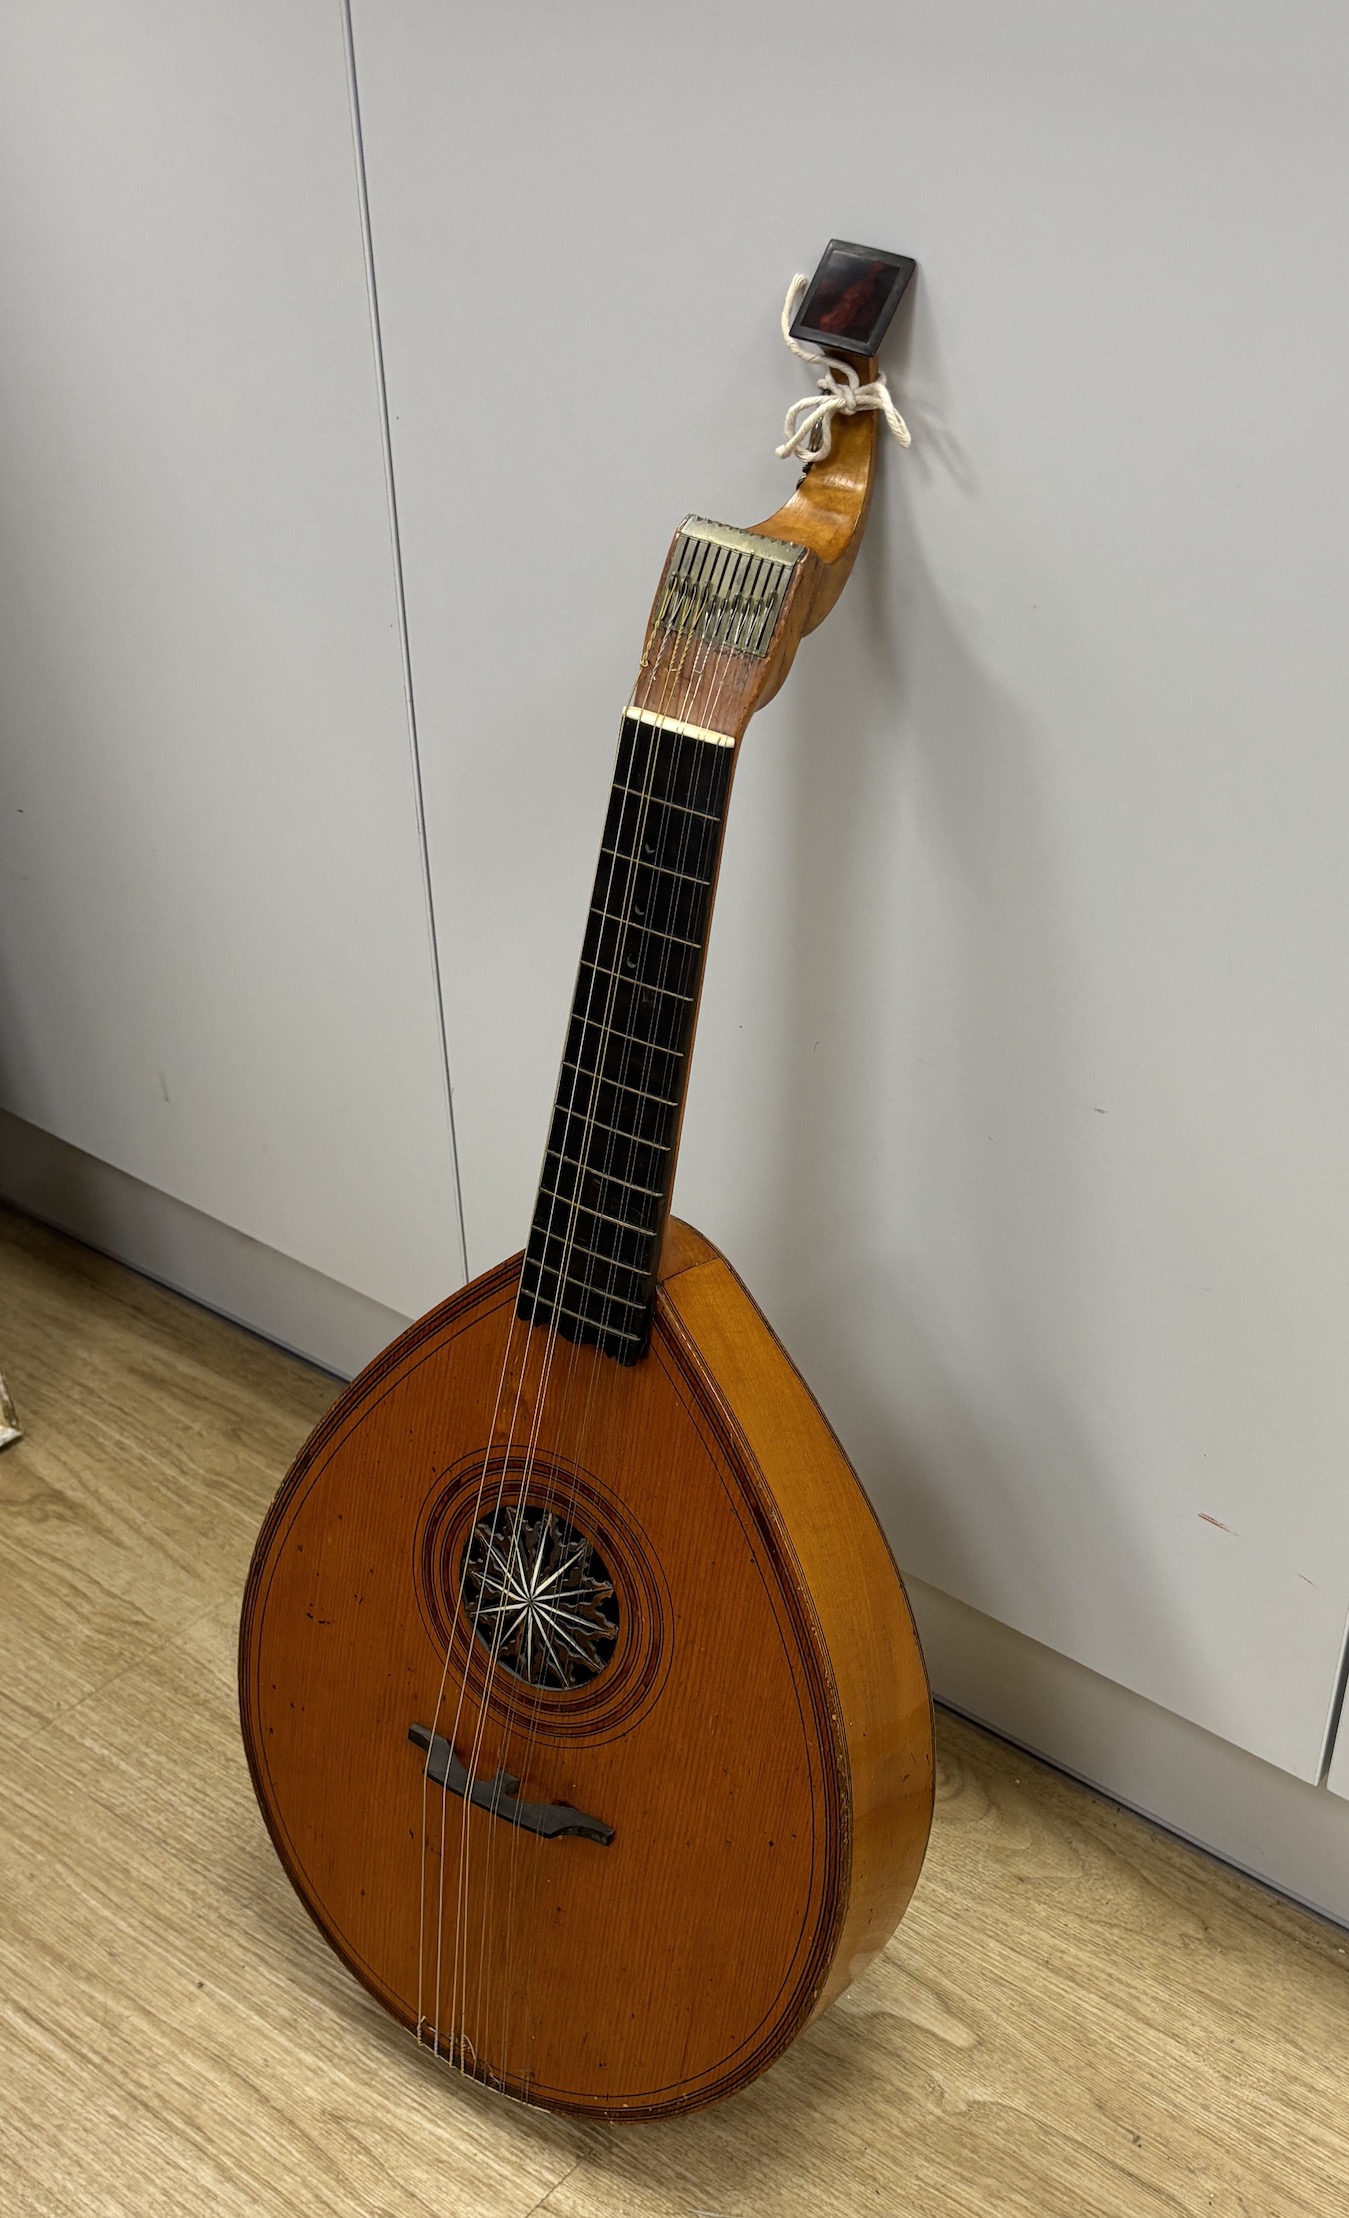 An 18th century English guitar, c.1760-80, possibly of London manufacture by Preston or Hintz, - Image 2 of 2